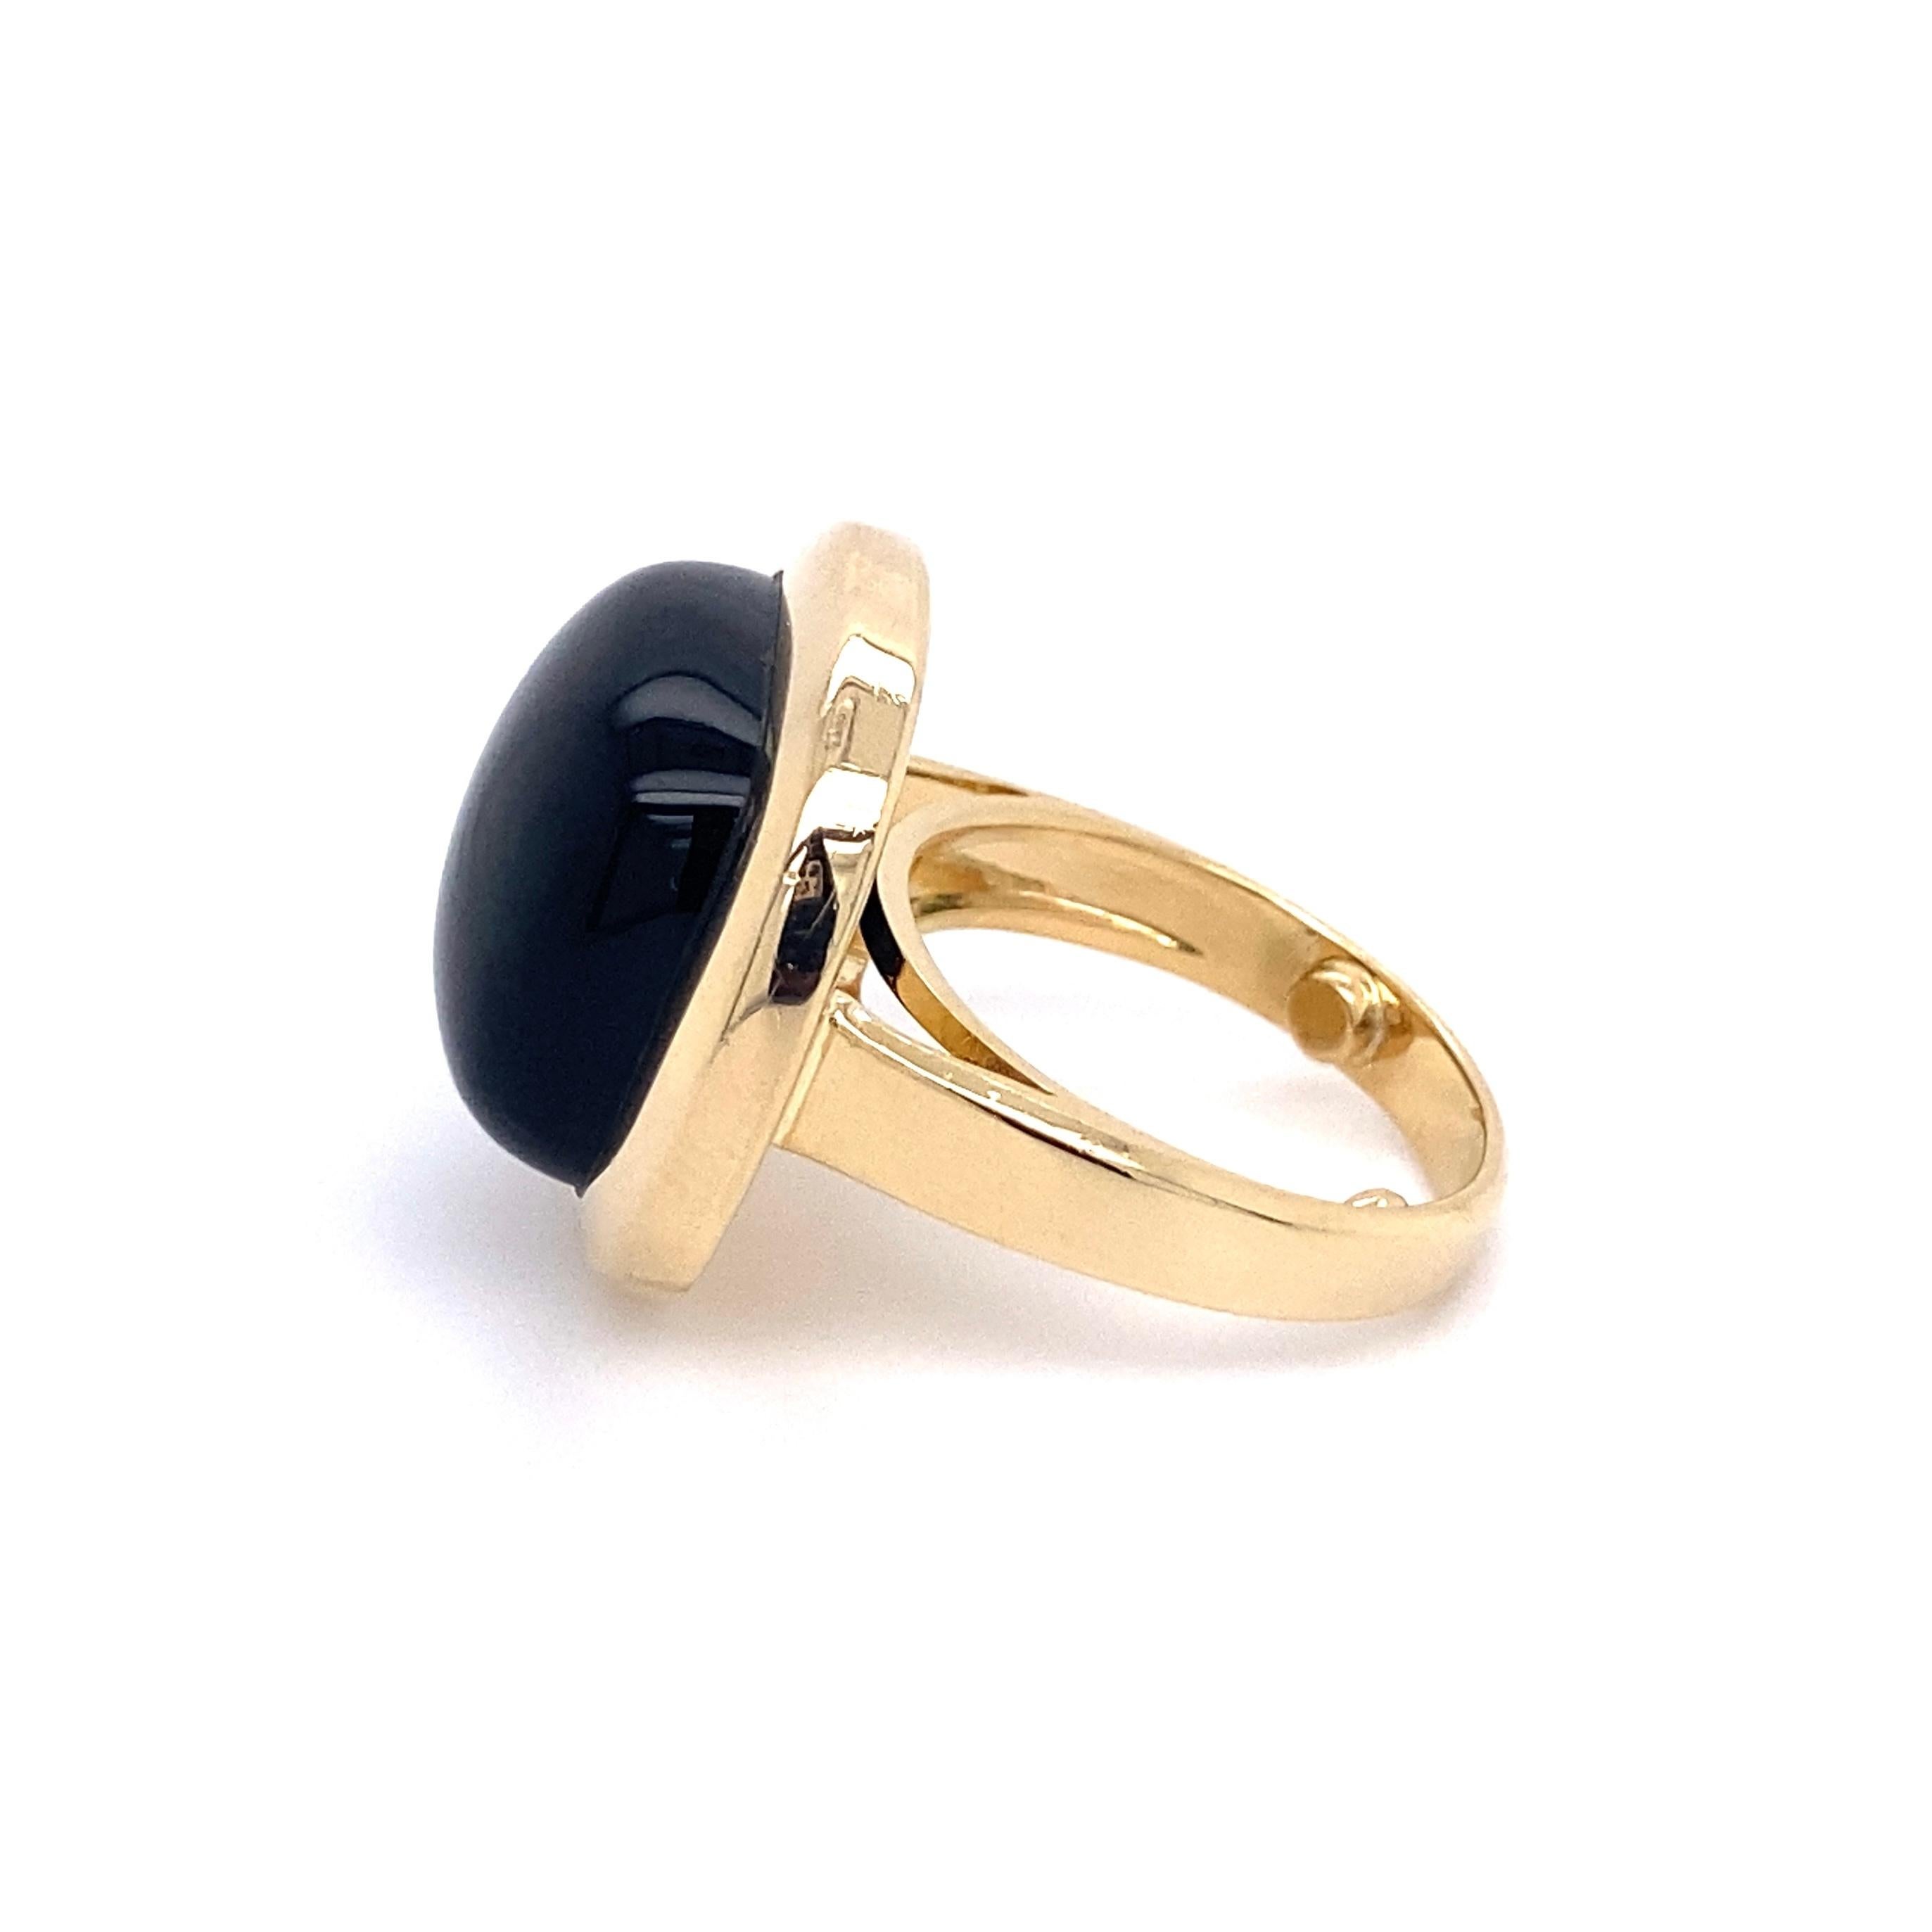 Men’s Cushion Shape Onyx Dome Gold Signet Ring Estate Fine Jewelry In Excellent Condition For Sale In Montreal, QC